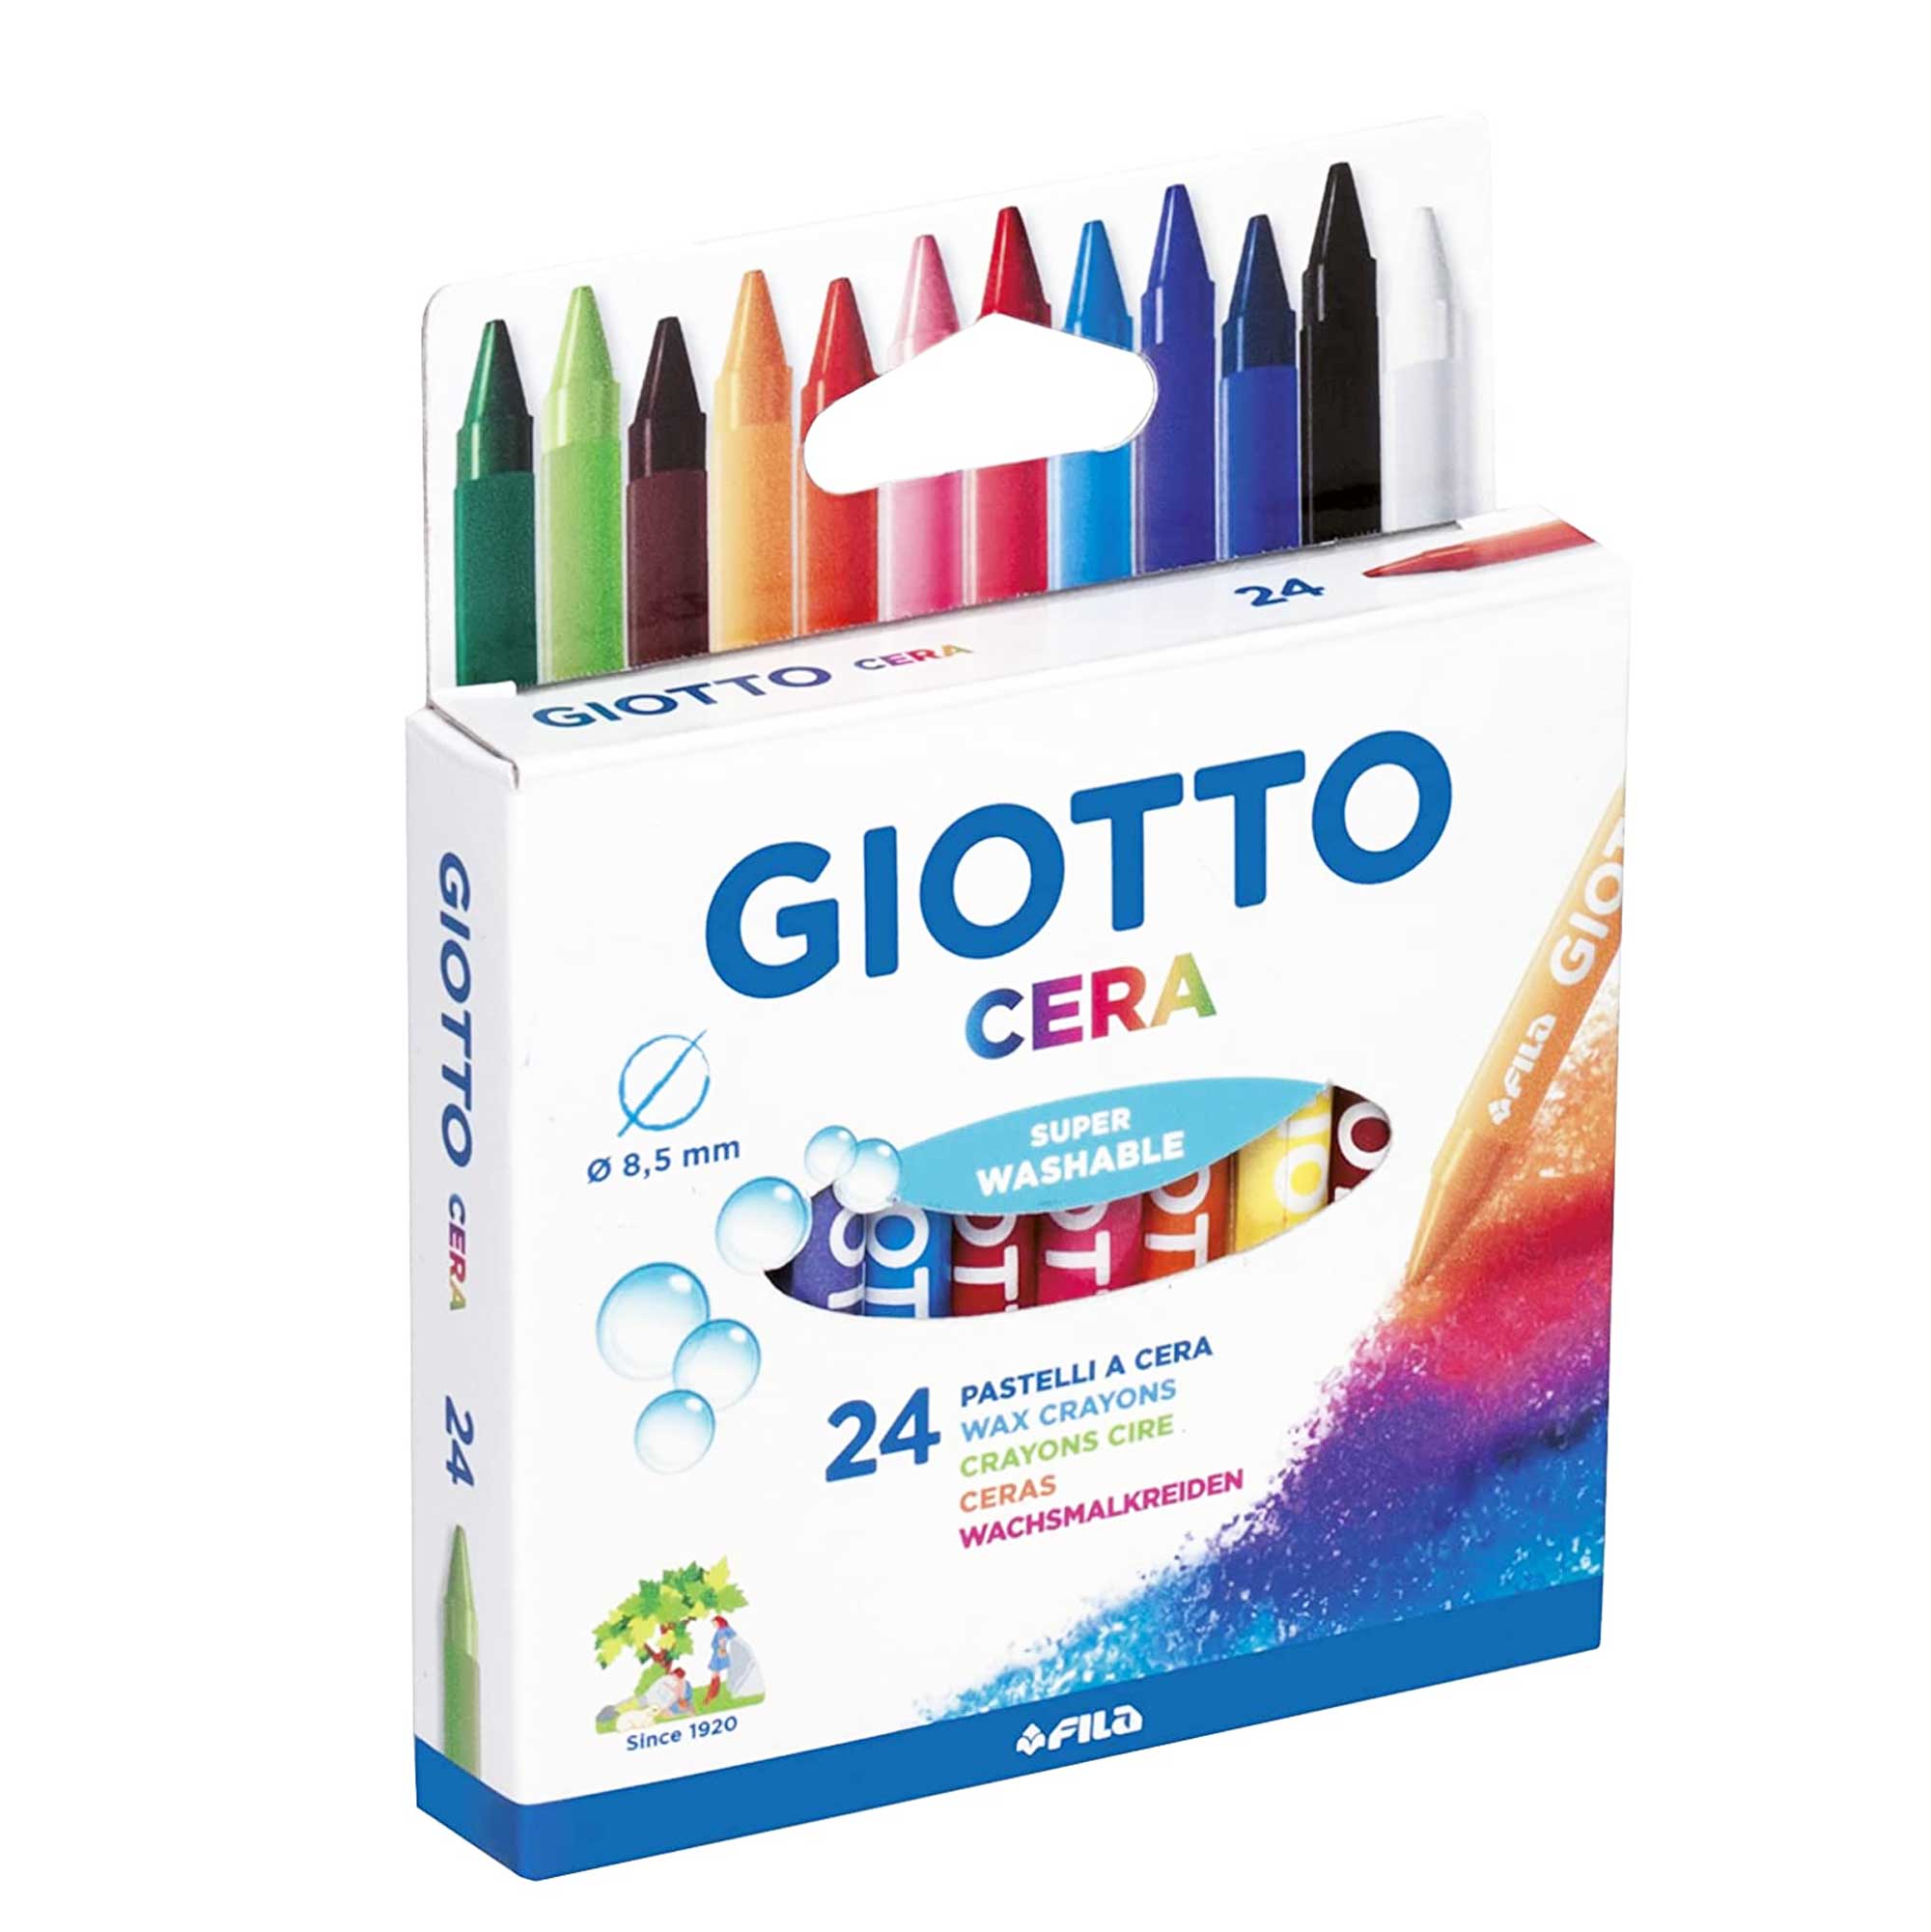 Giotto Cera - Wax Crayons Pack of 24 Media 1 of 3